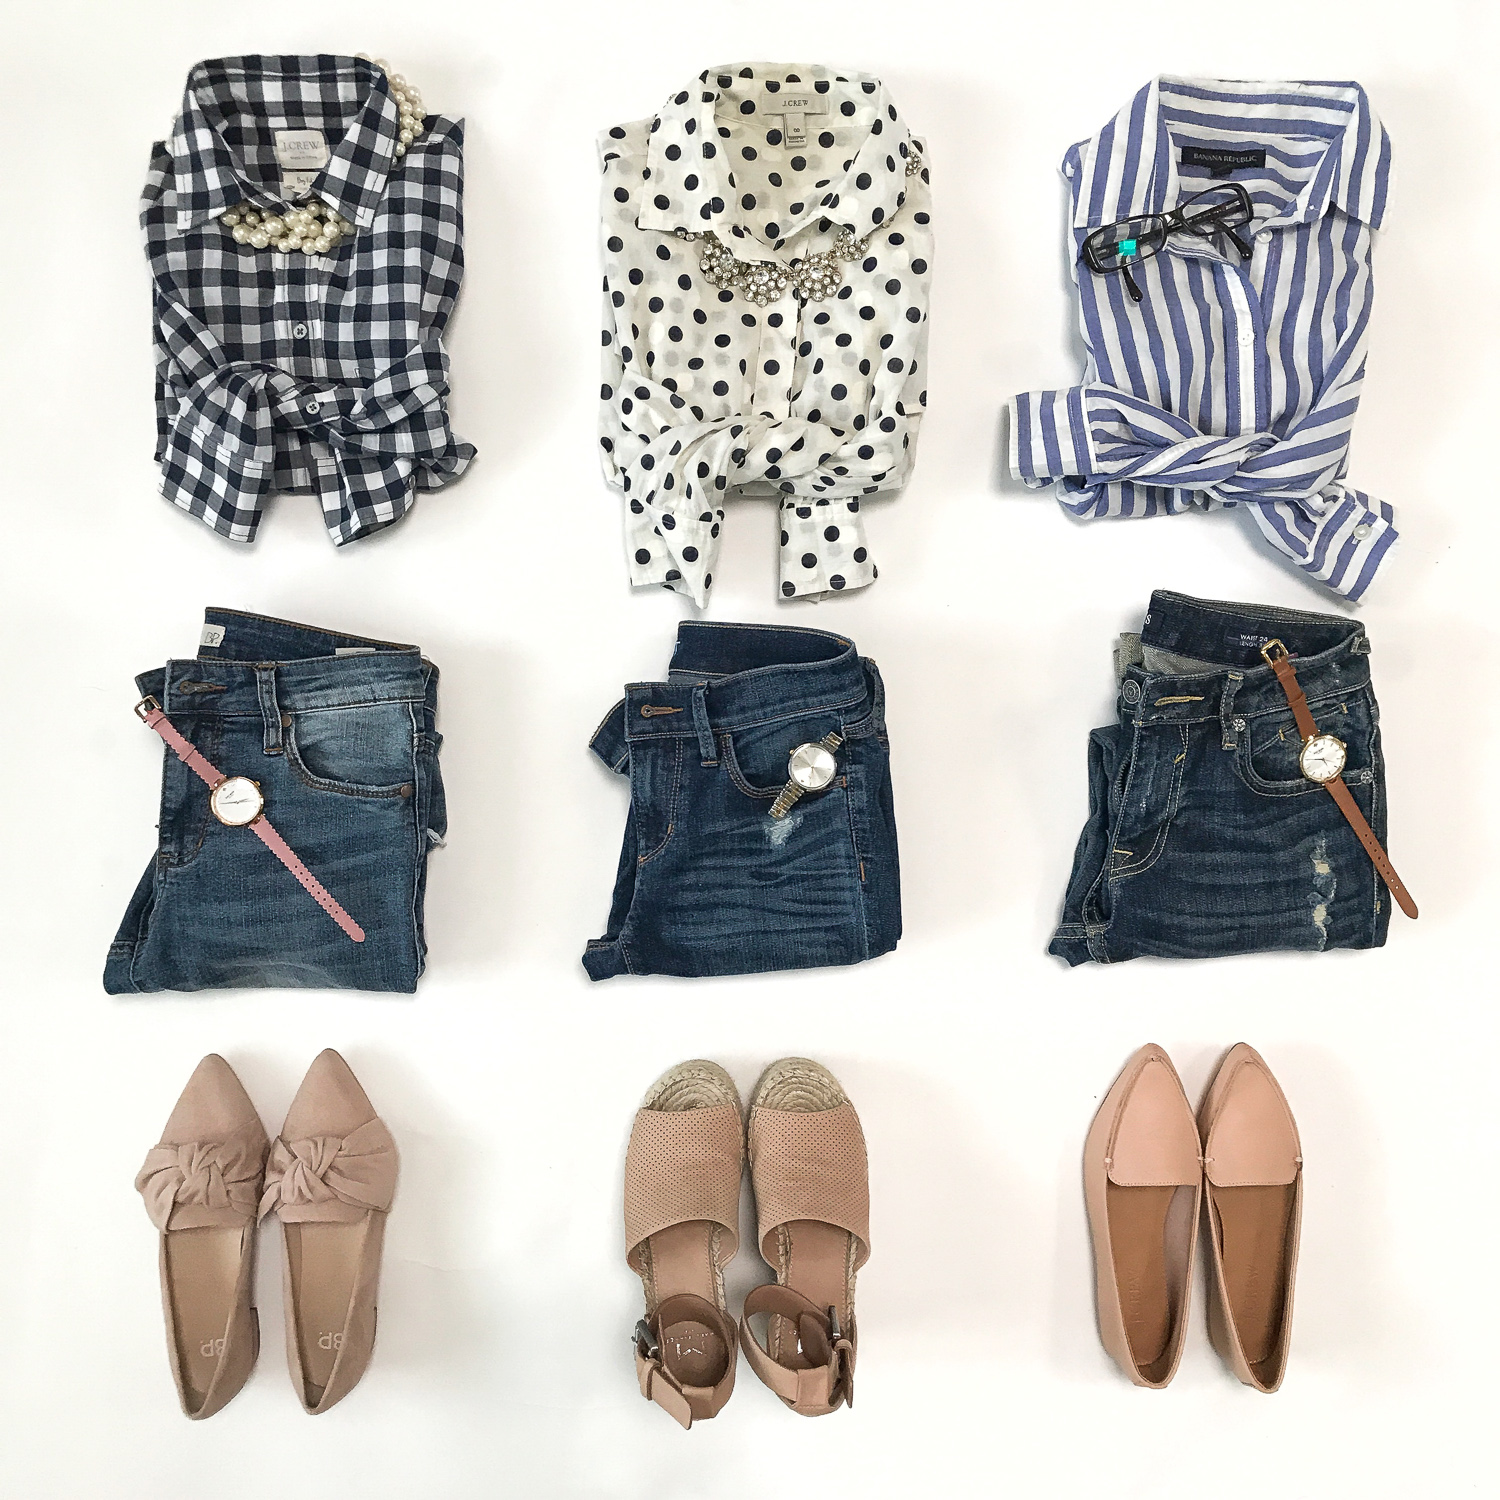 button up shirts casual denim neutral blush sandals loafers outfit ideas